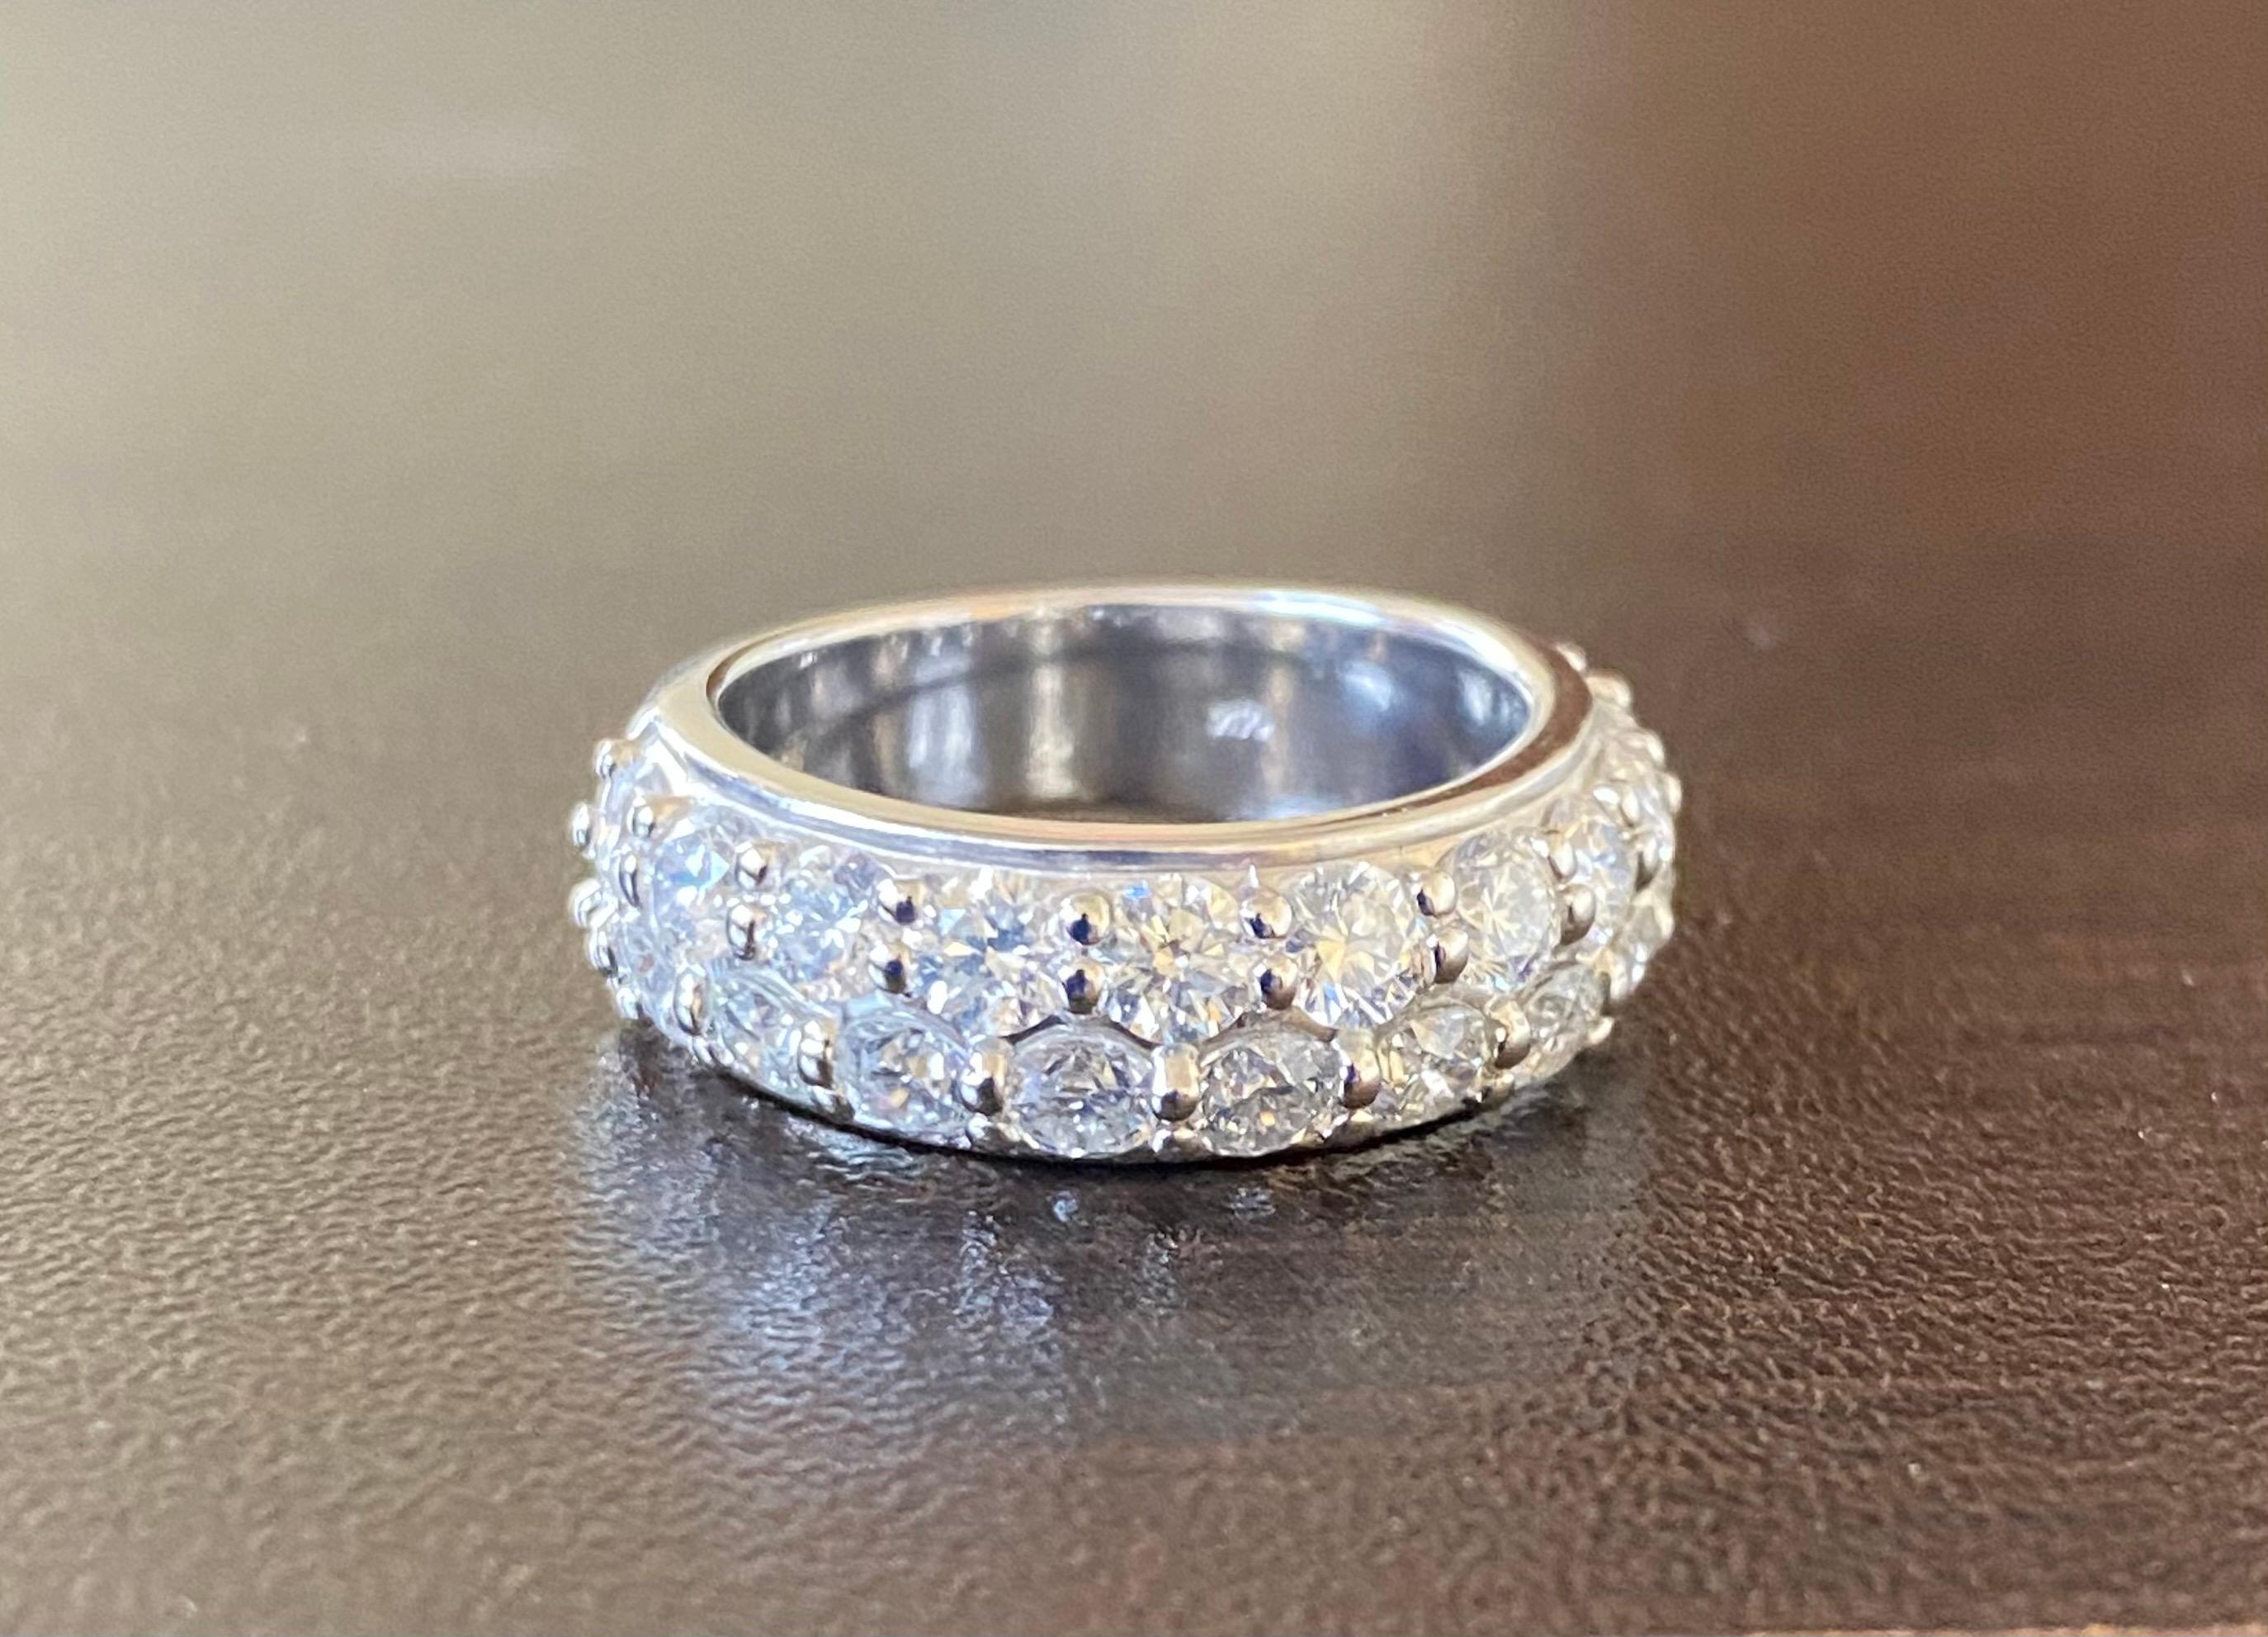 2 Row diamond ring set halfway in 14K white gold. The ring is set with 20 stones each weighing 0.15 carats. The total weight of the ring is 3.00 carats. The color of the stones are G, the clarity is SI1. The ring is a size 6.5.